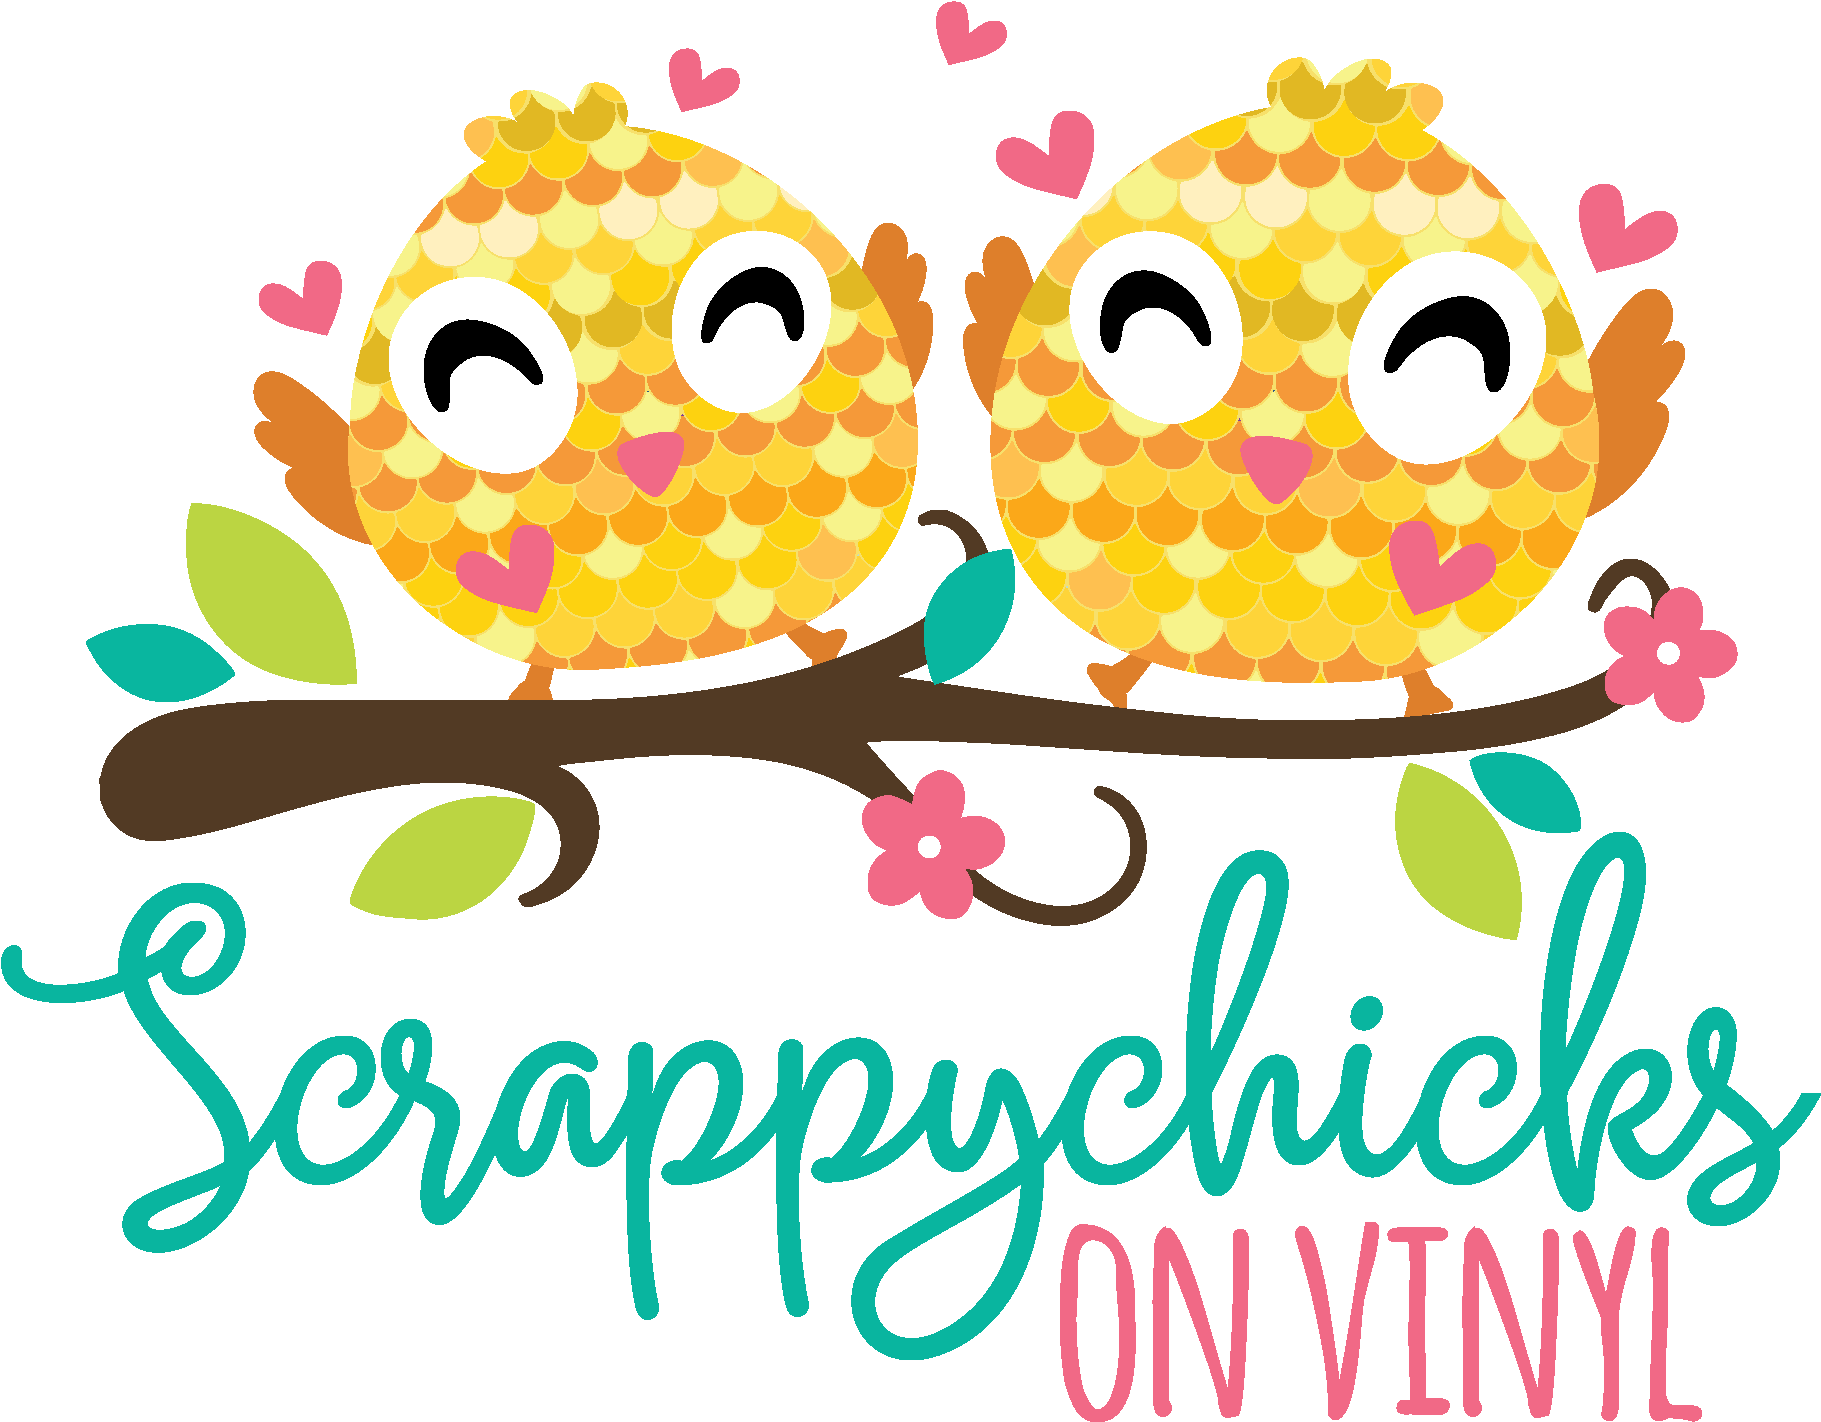 Scrappychicks On Vinyl - Watercolor Painting (2000x2000)